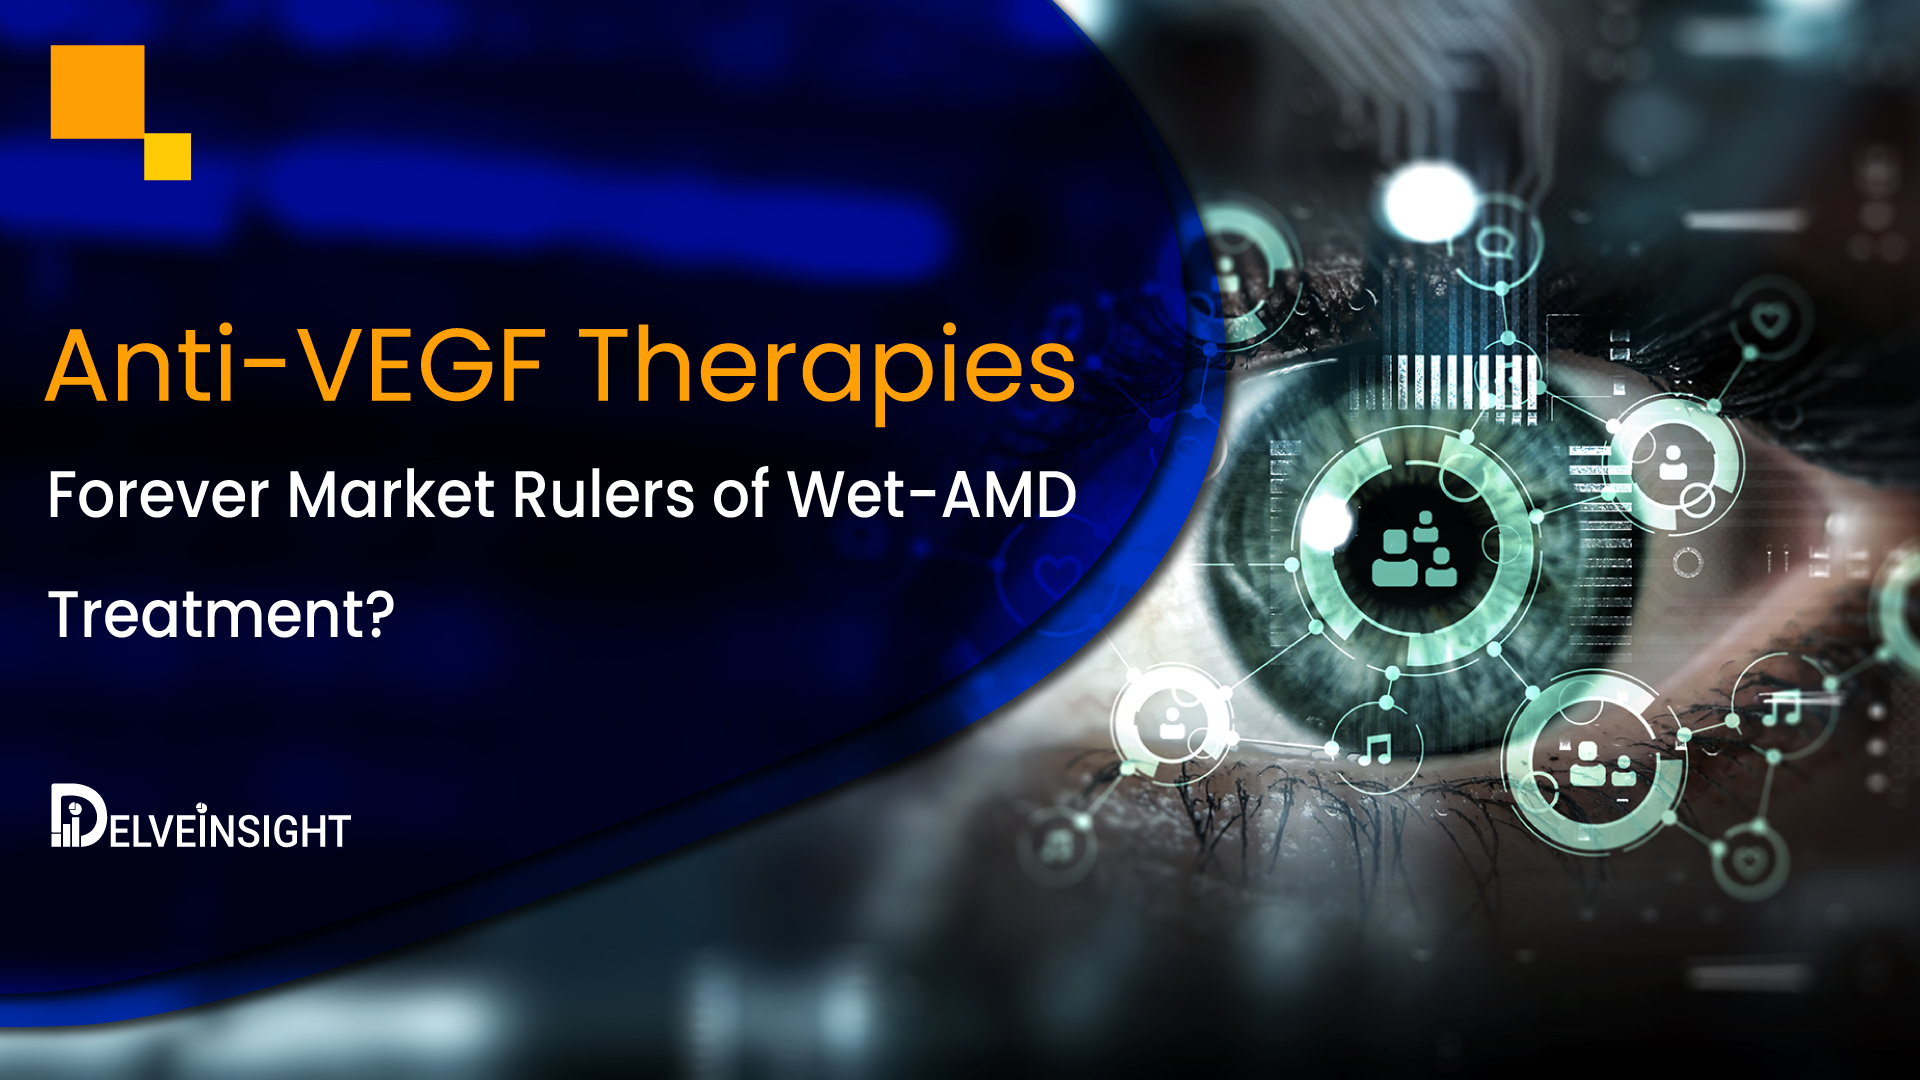 Anti-VEGF Therapies: Forever Market Rulers of Wet-AMD Treatment?